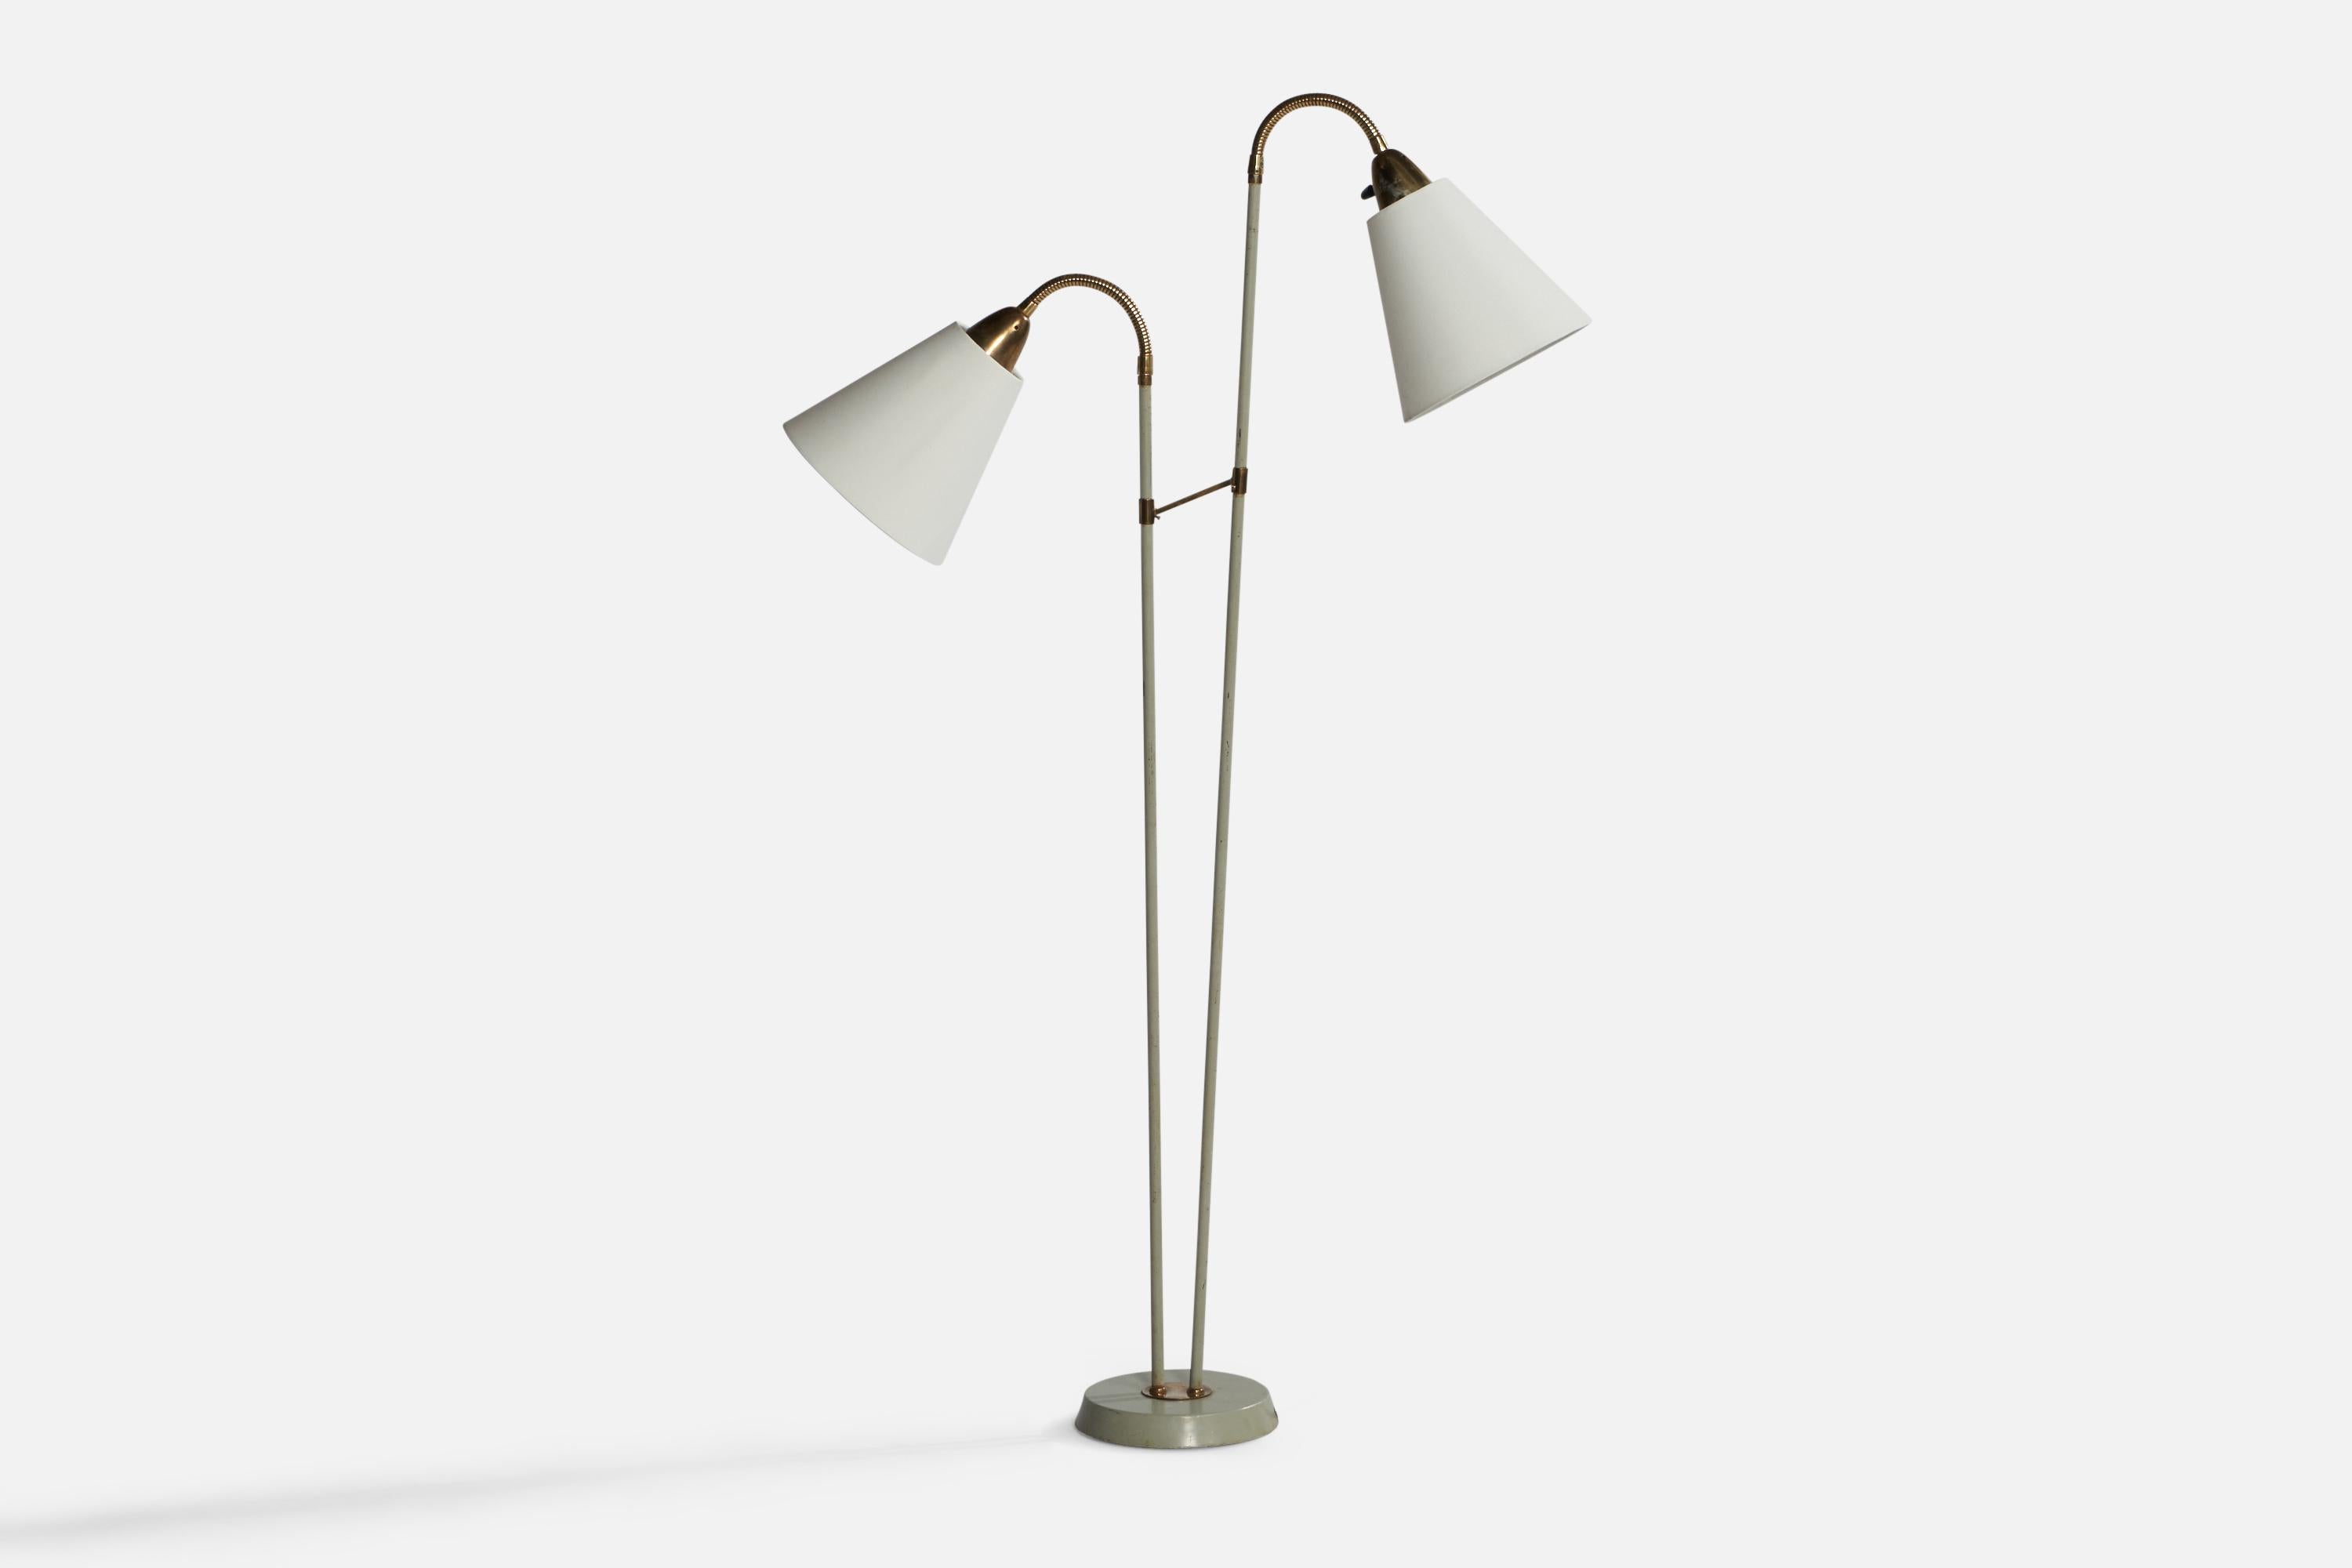 A brass and grey-lacquered metal and white fabric floor lamp designed and produced in Sweden, 1940s.

Overall Dimensions (inches): 55.5” H x 17” W x 19.5” D. Stated dimensions include shades.
Dimensions vary based on positions of lights.
Bulb